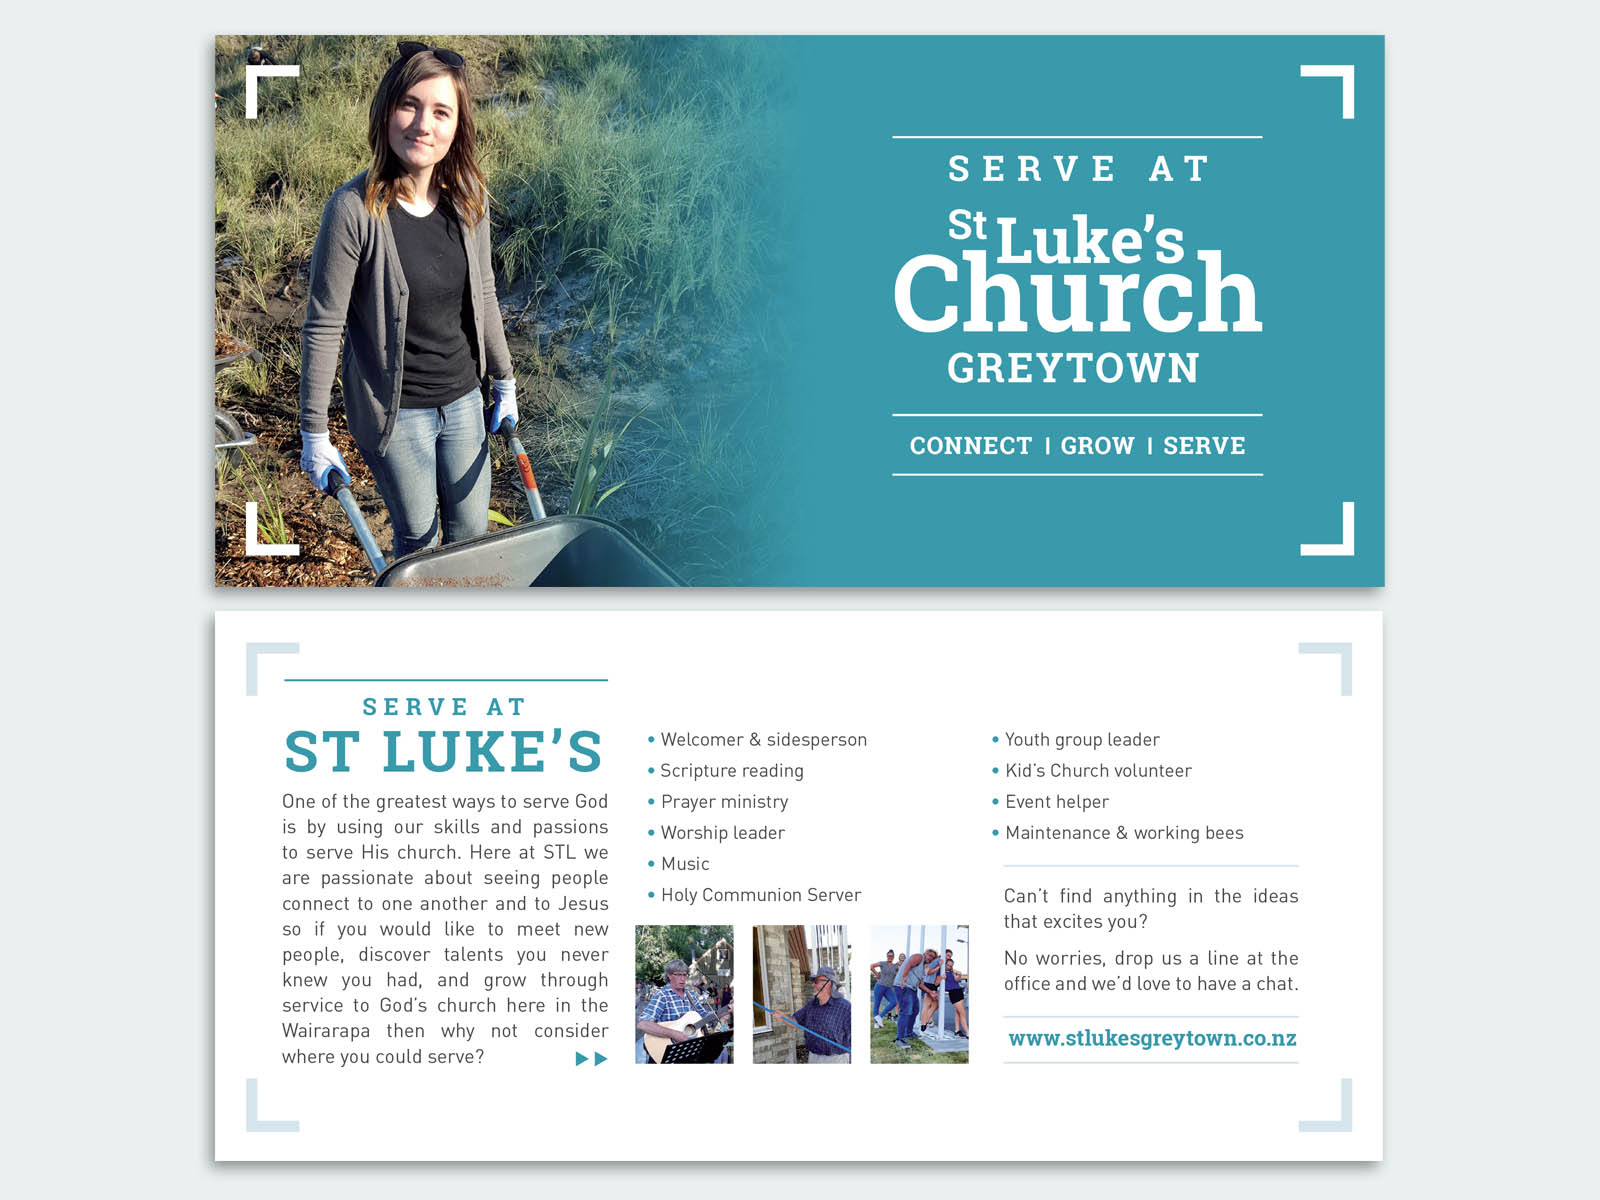 St Luke's church flyer which talks about how to serve at St Lukes Greytown.